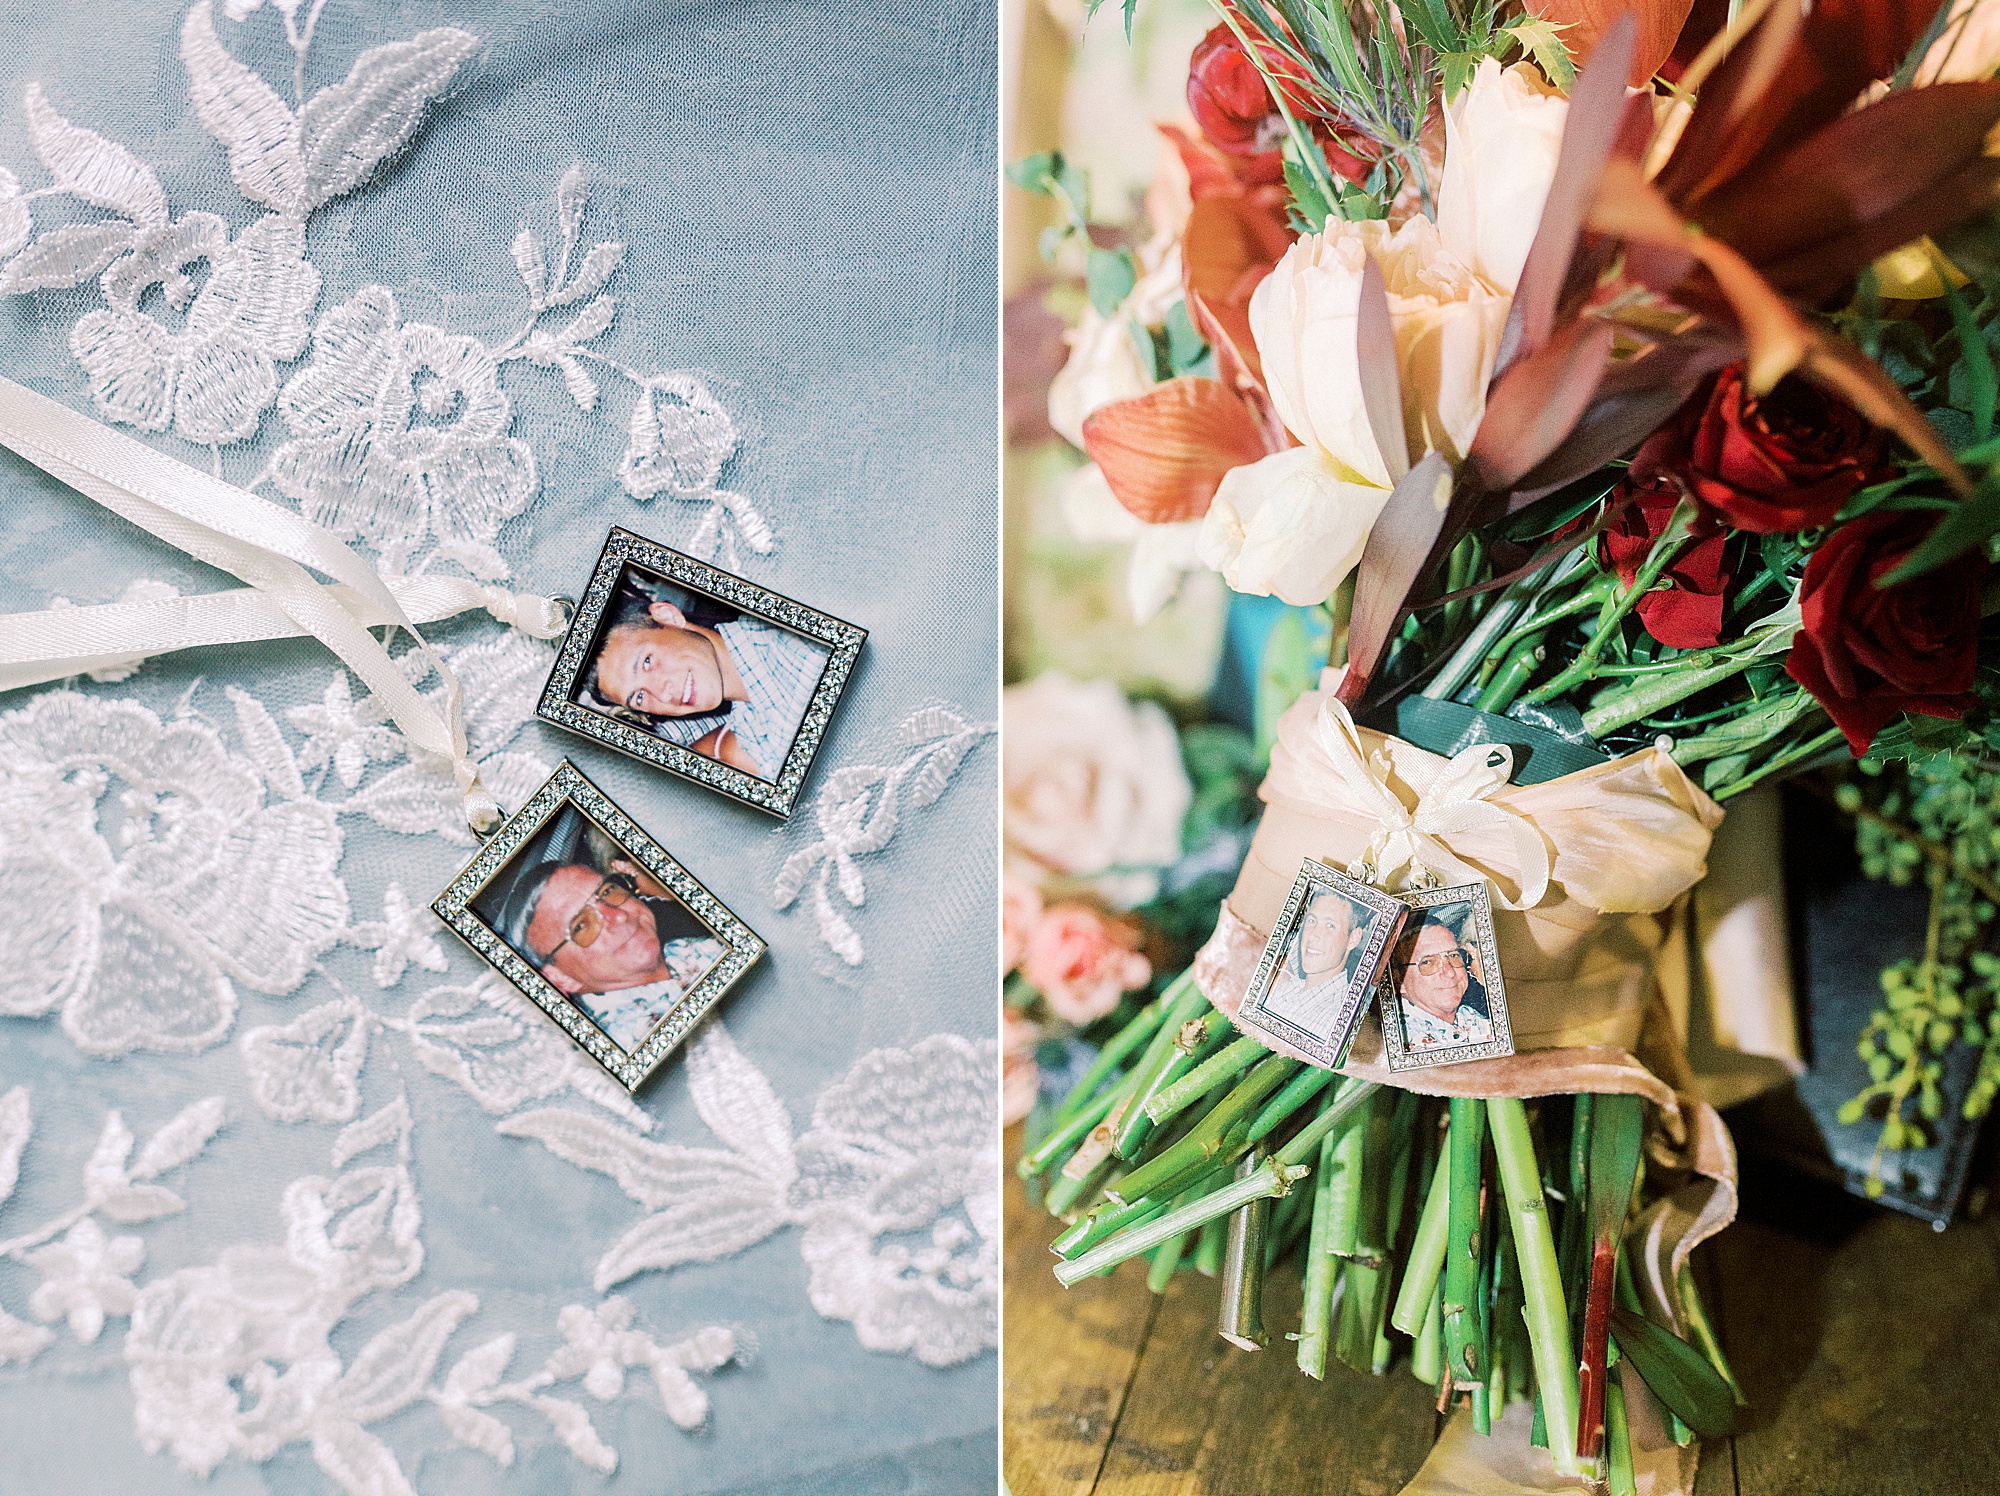 bride's bouquet with memory charms for Vesuvius Vineyards wedding day